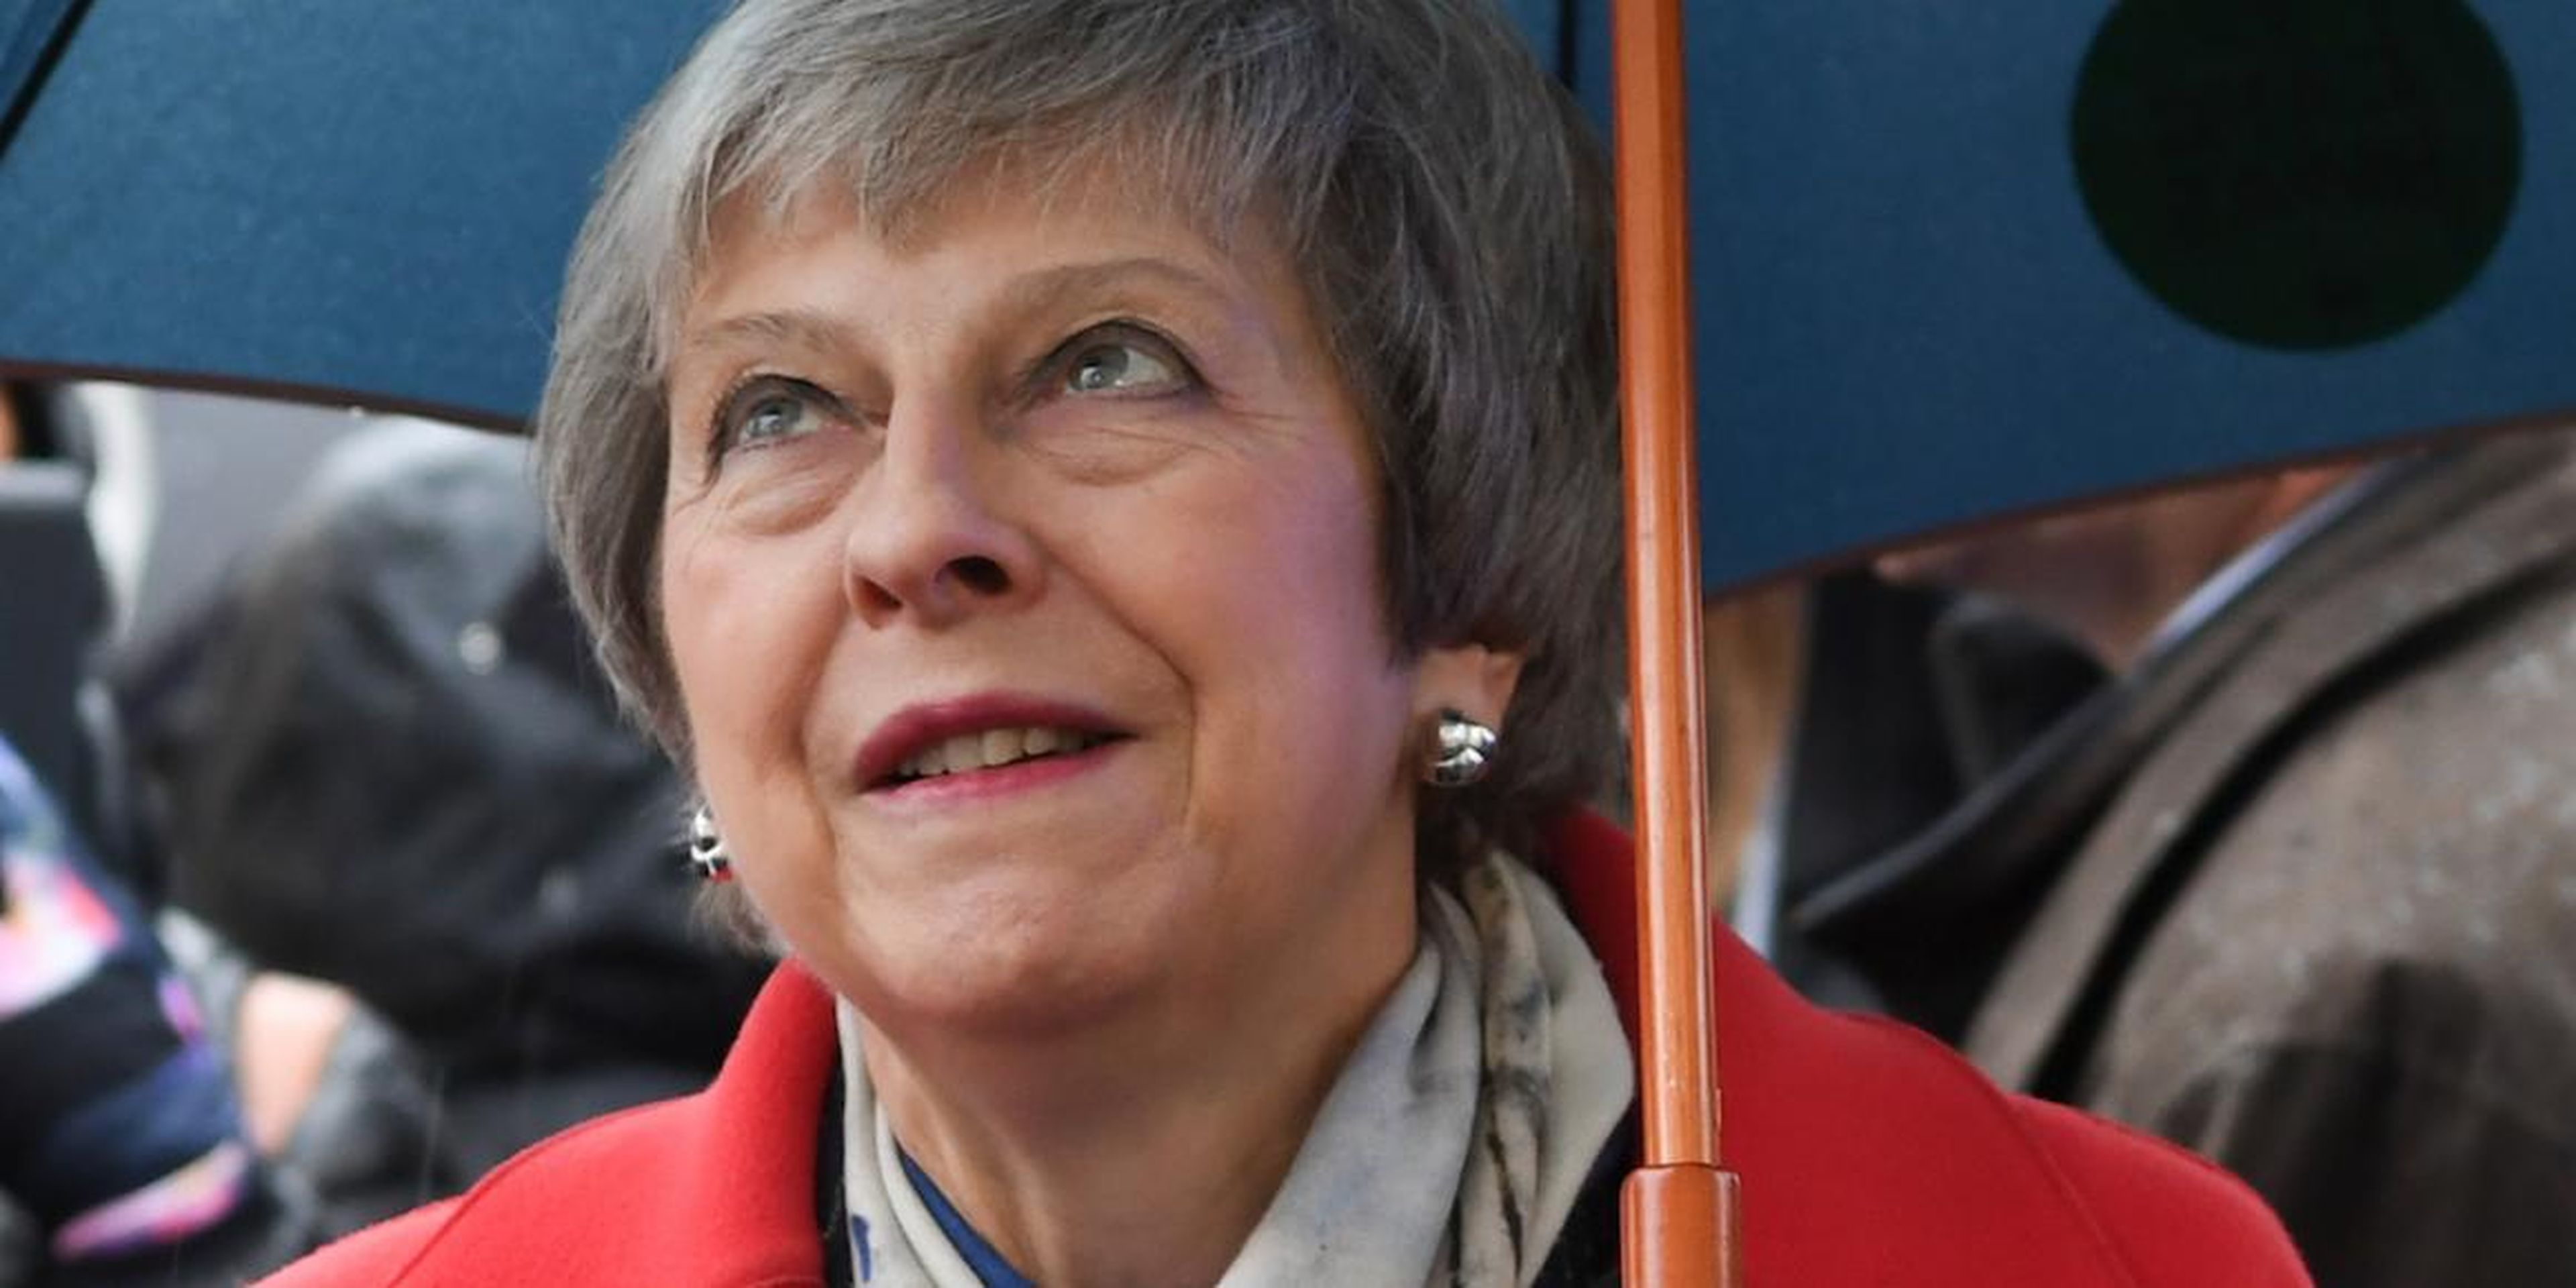 A general election could be on the way after DUP threatens to bring down Theresa May